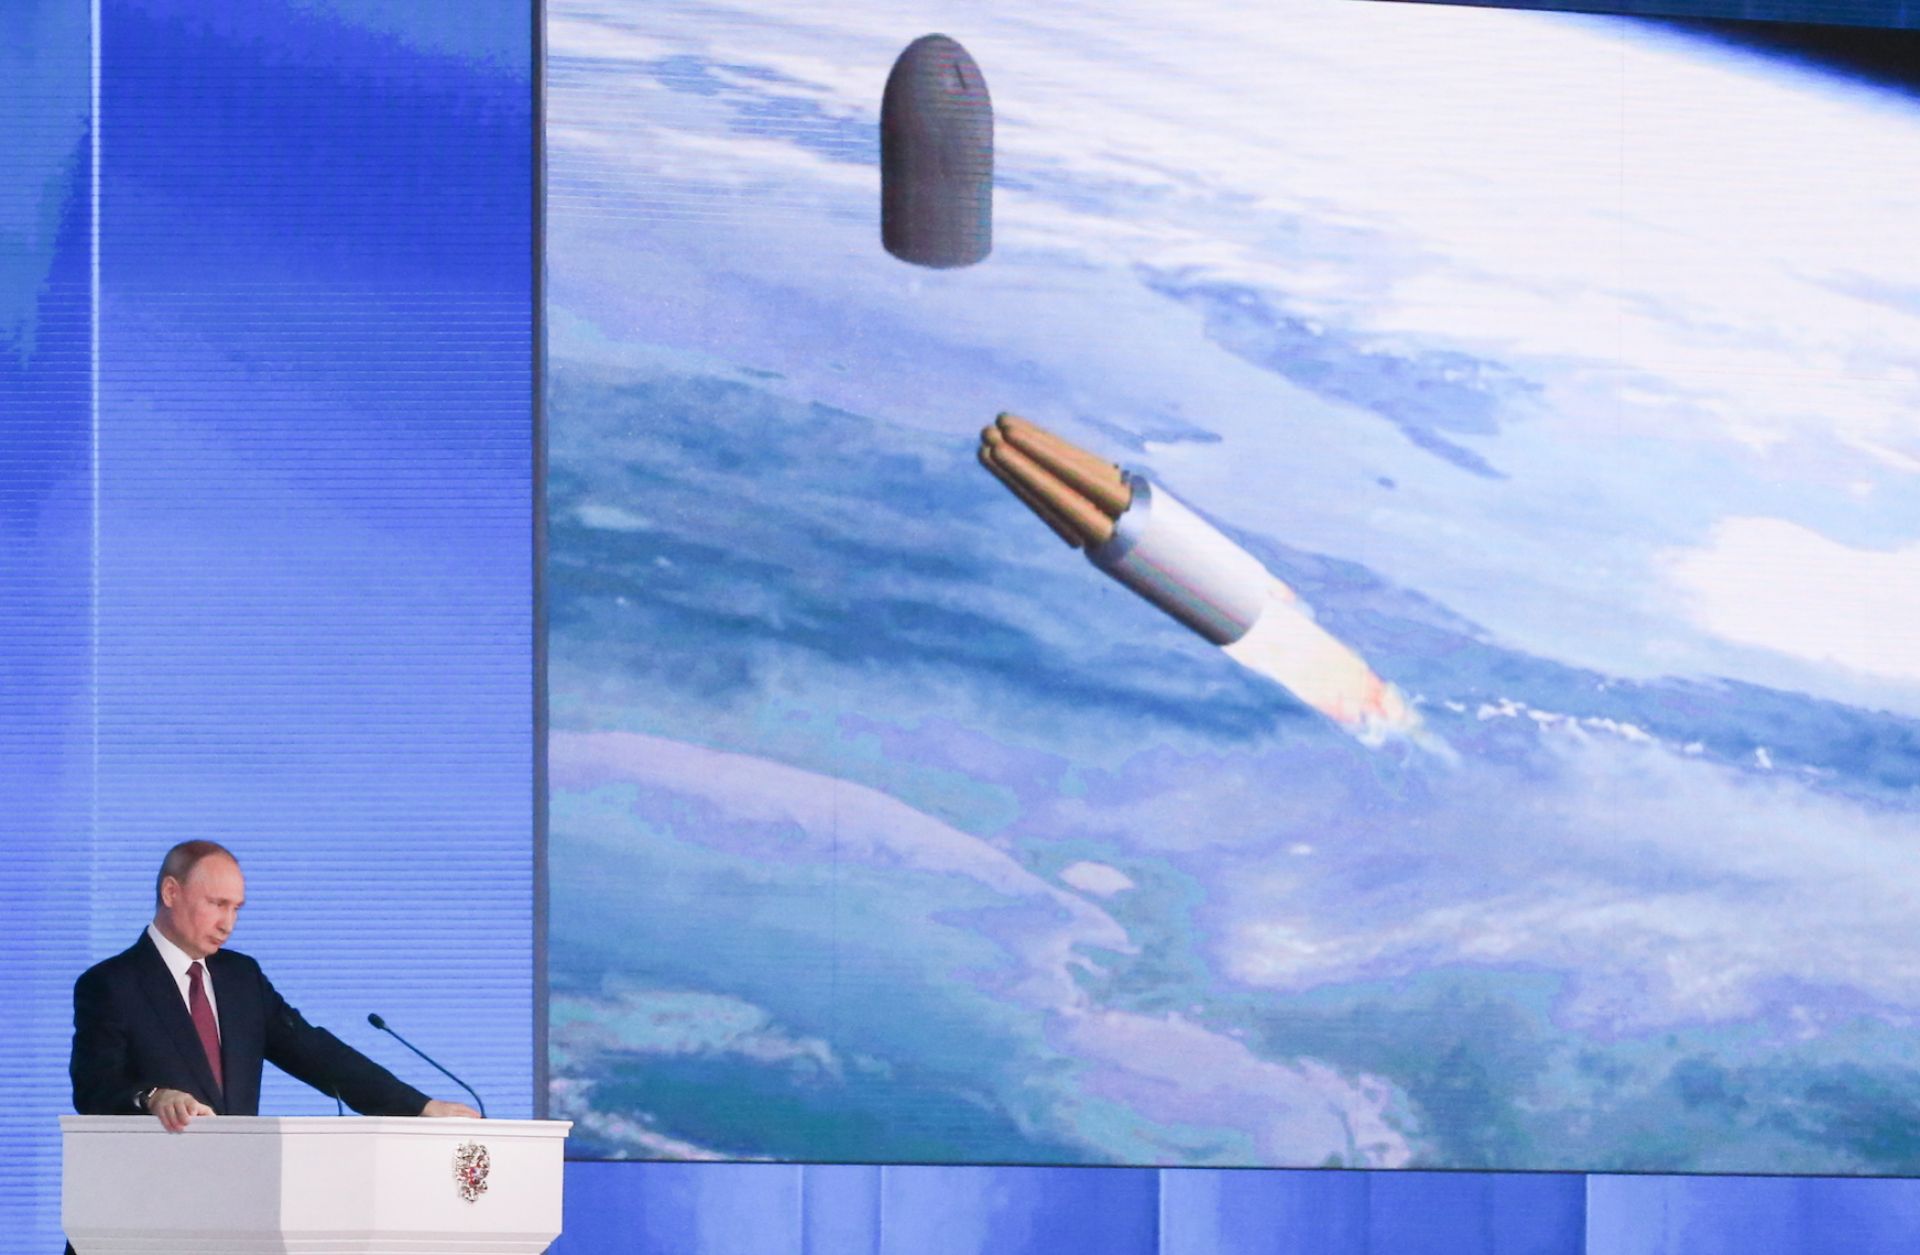 This photo shows Russian President Vladimir Putin with an image of a strategic missile